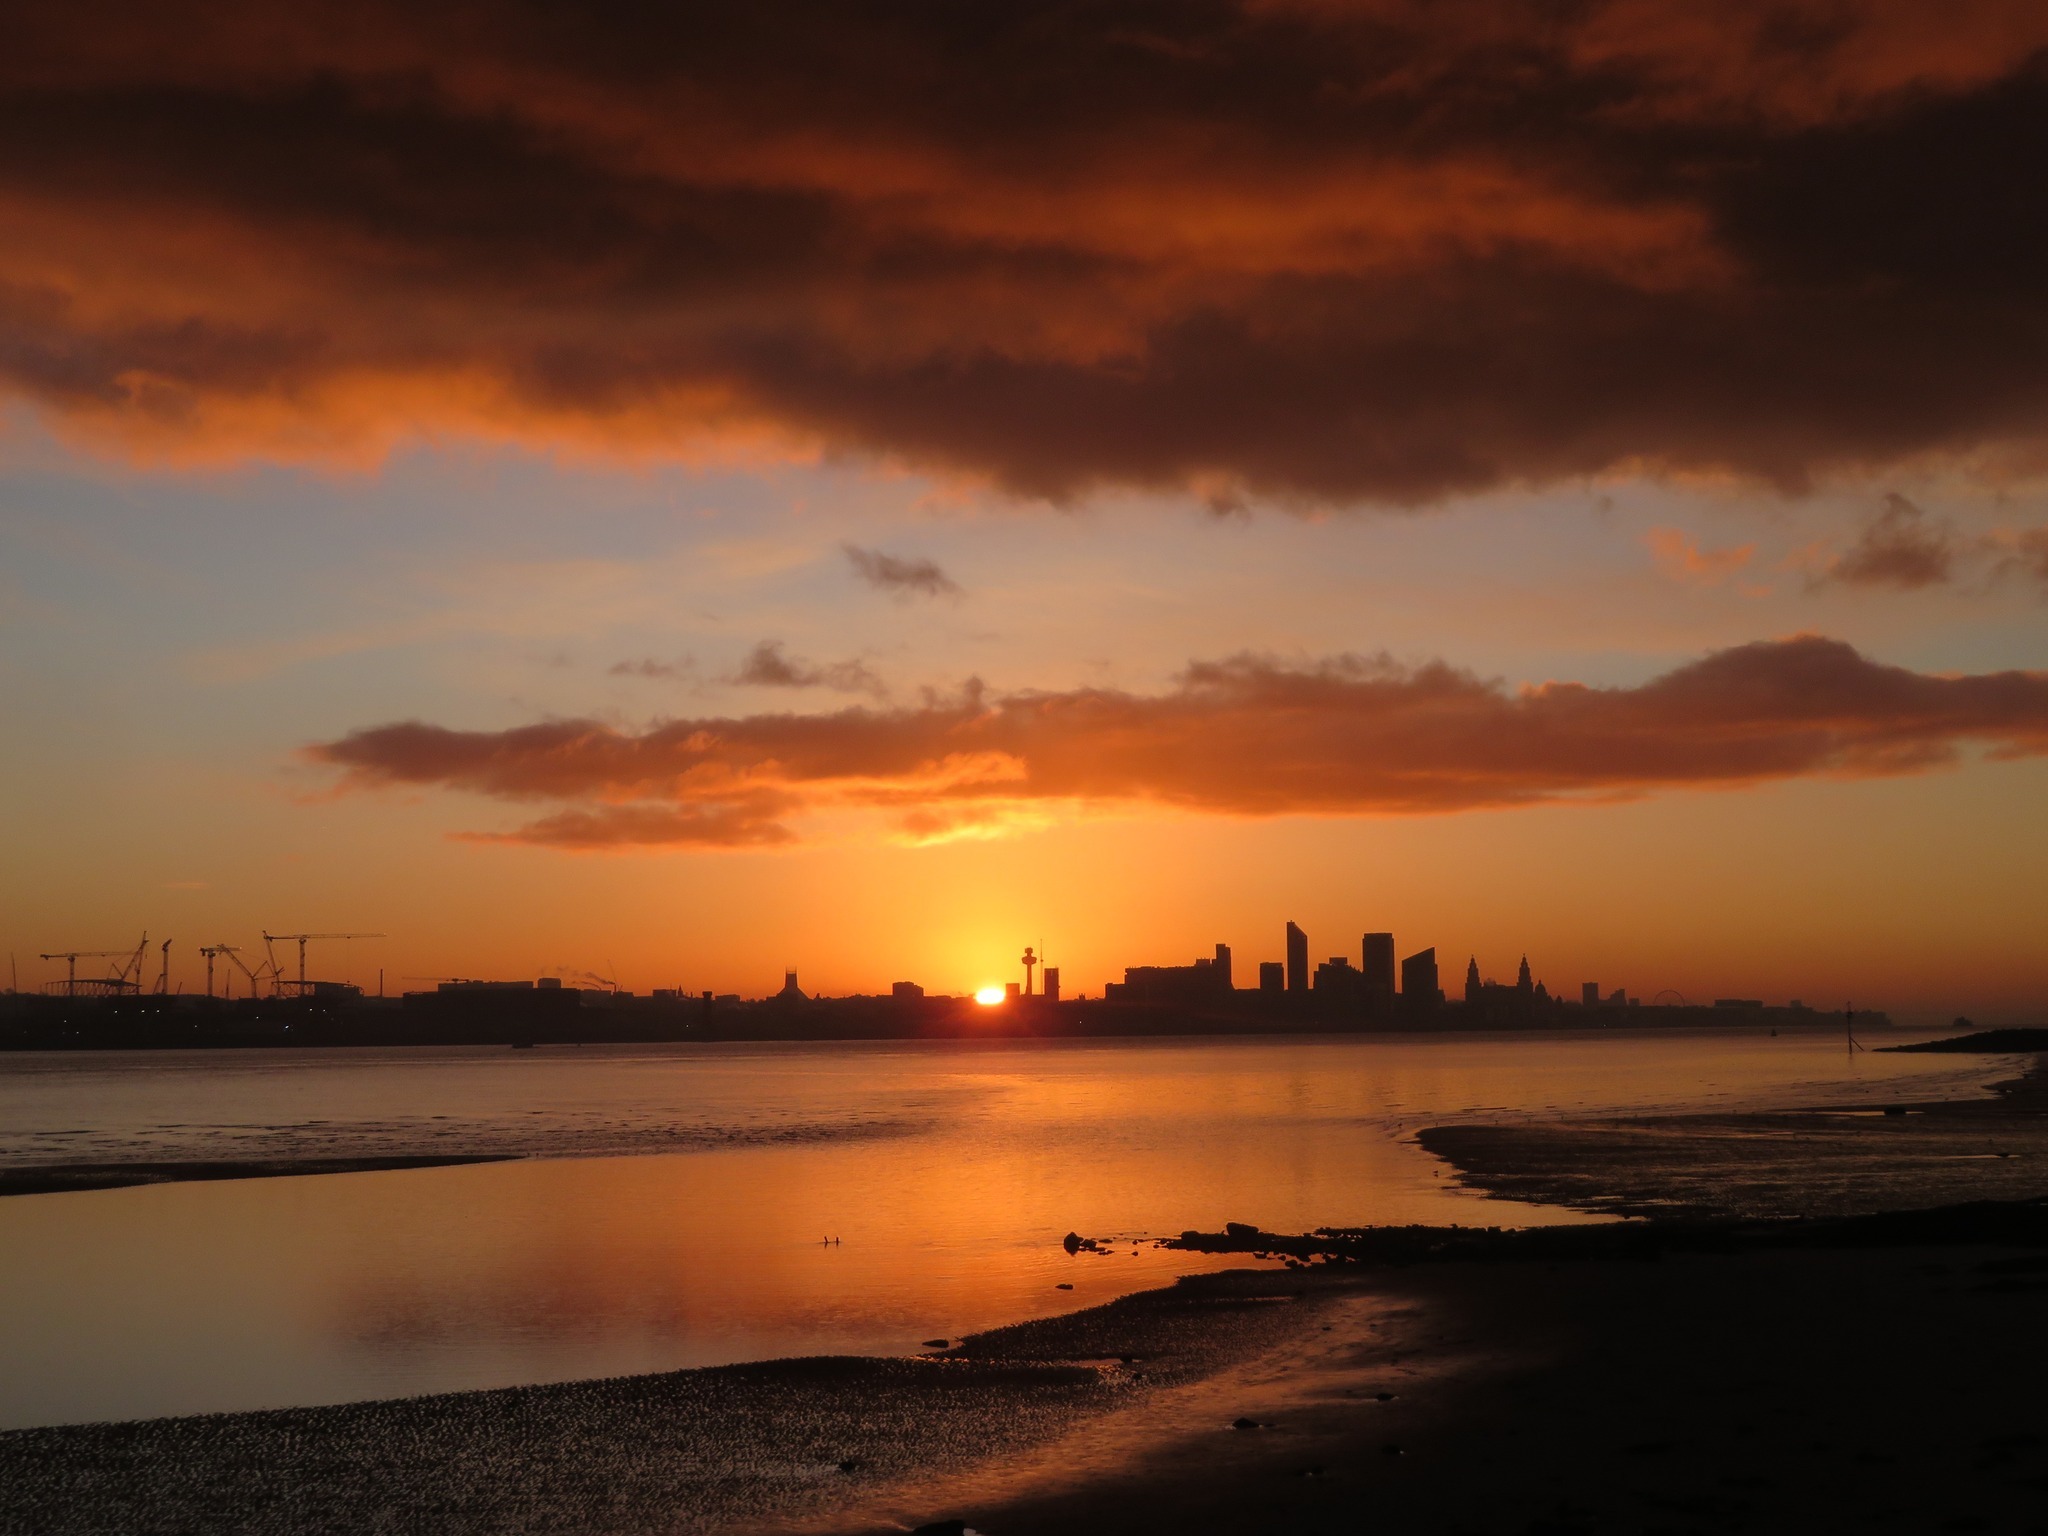 Sunrise over the Mersey by Jan E Peddie